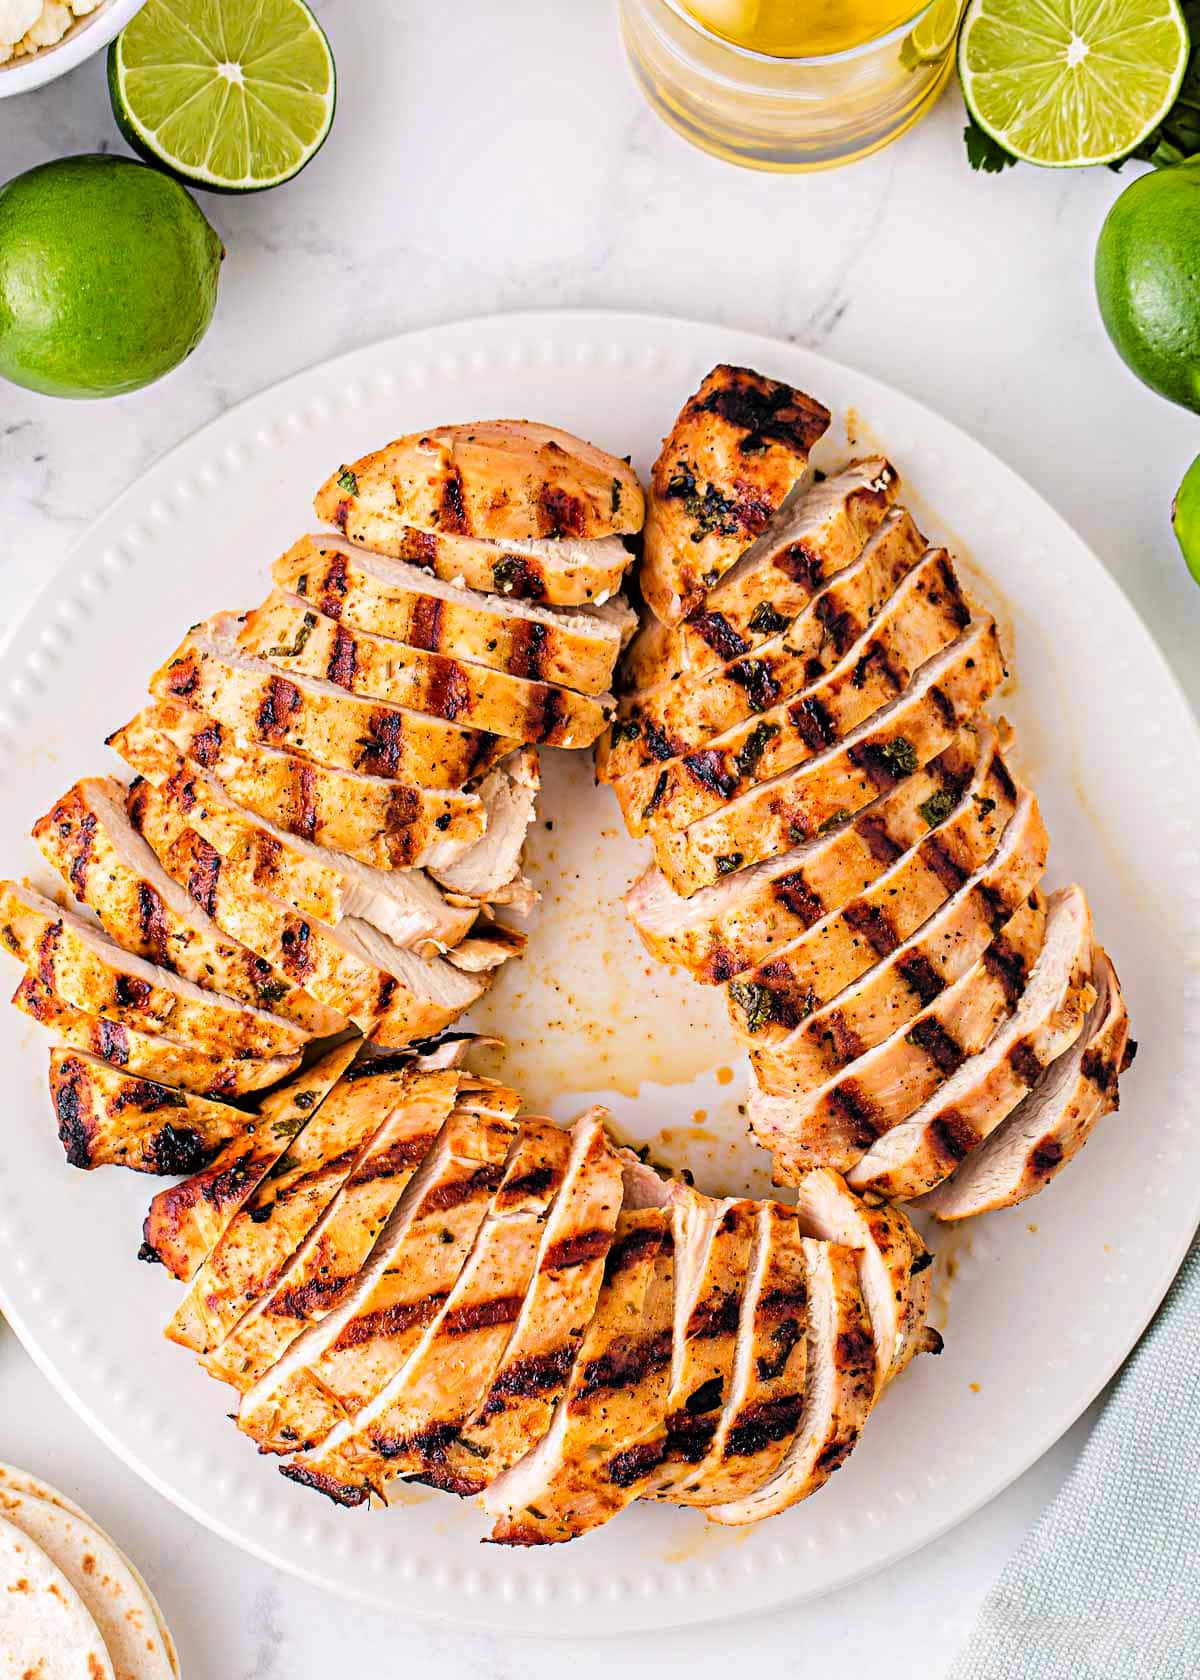 white plate with grilled chicken breasts cut into slices arranged in a circular pattern. Limes can be seen next to the plate.